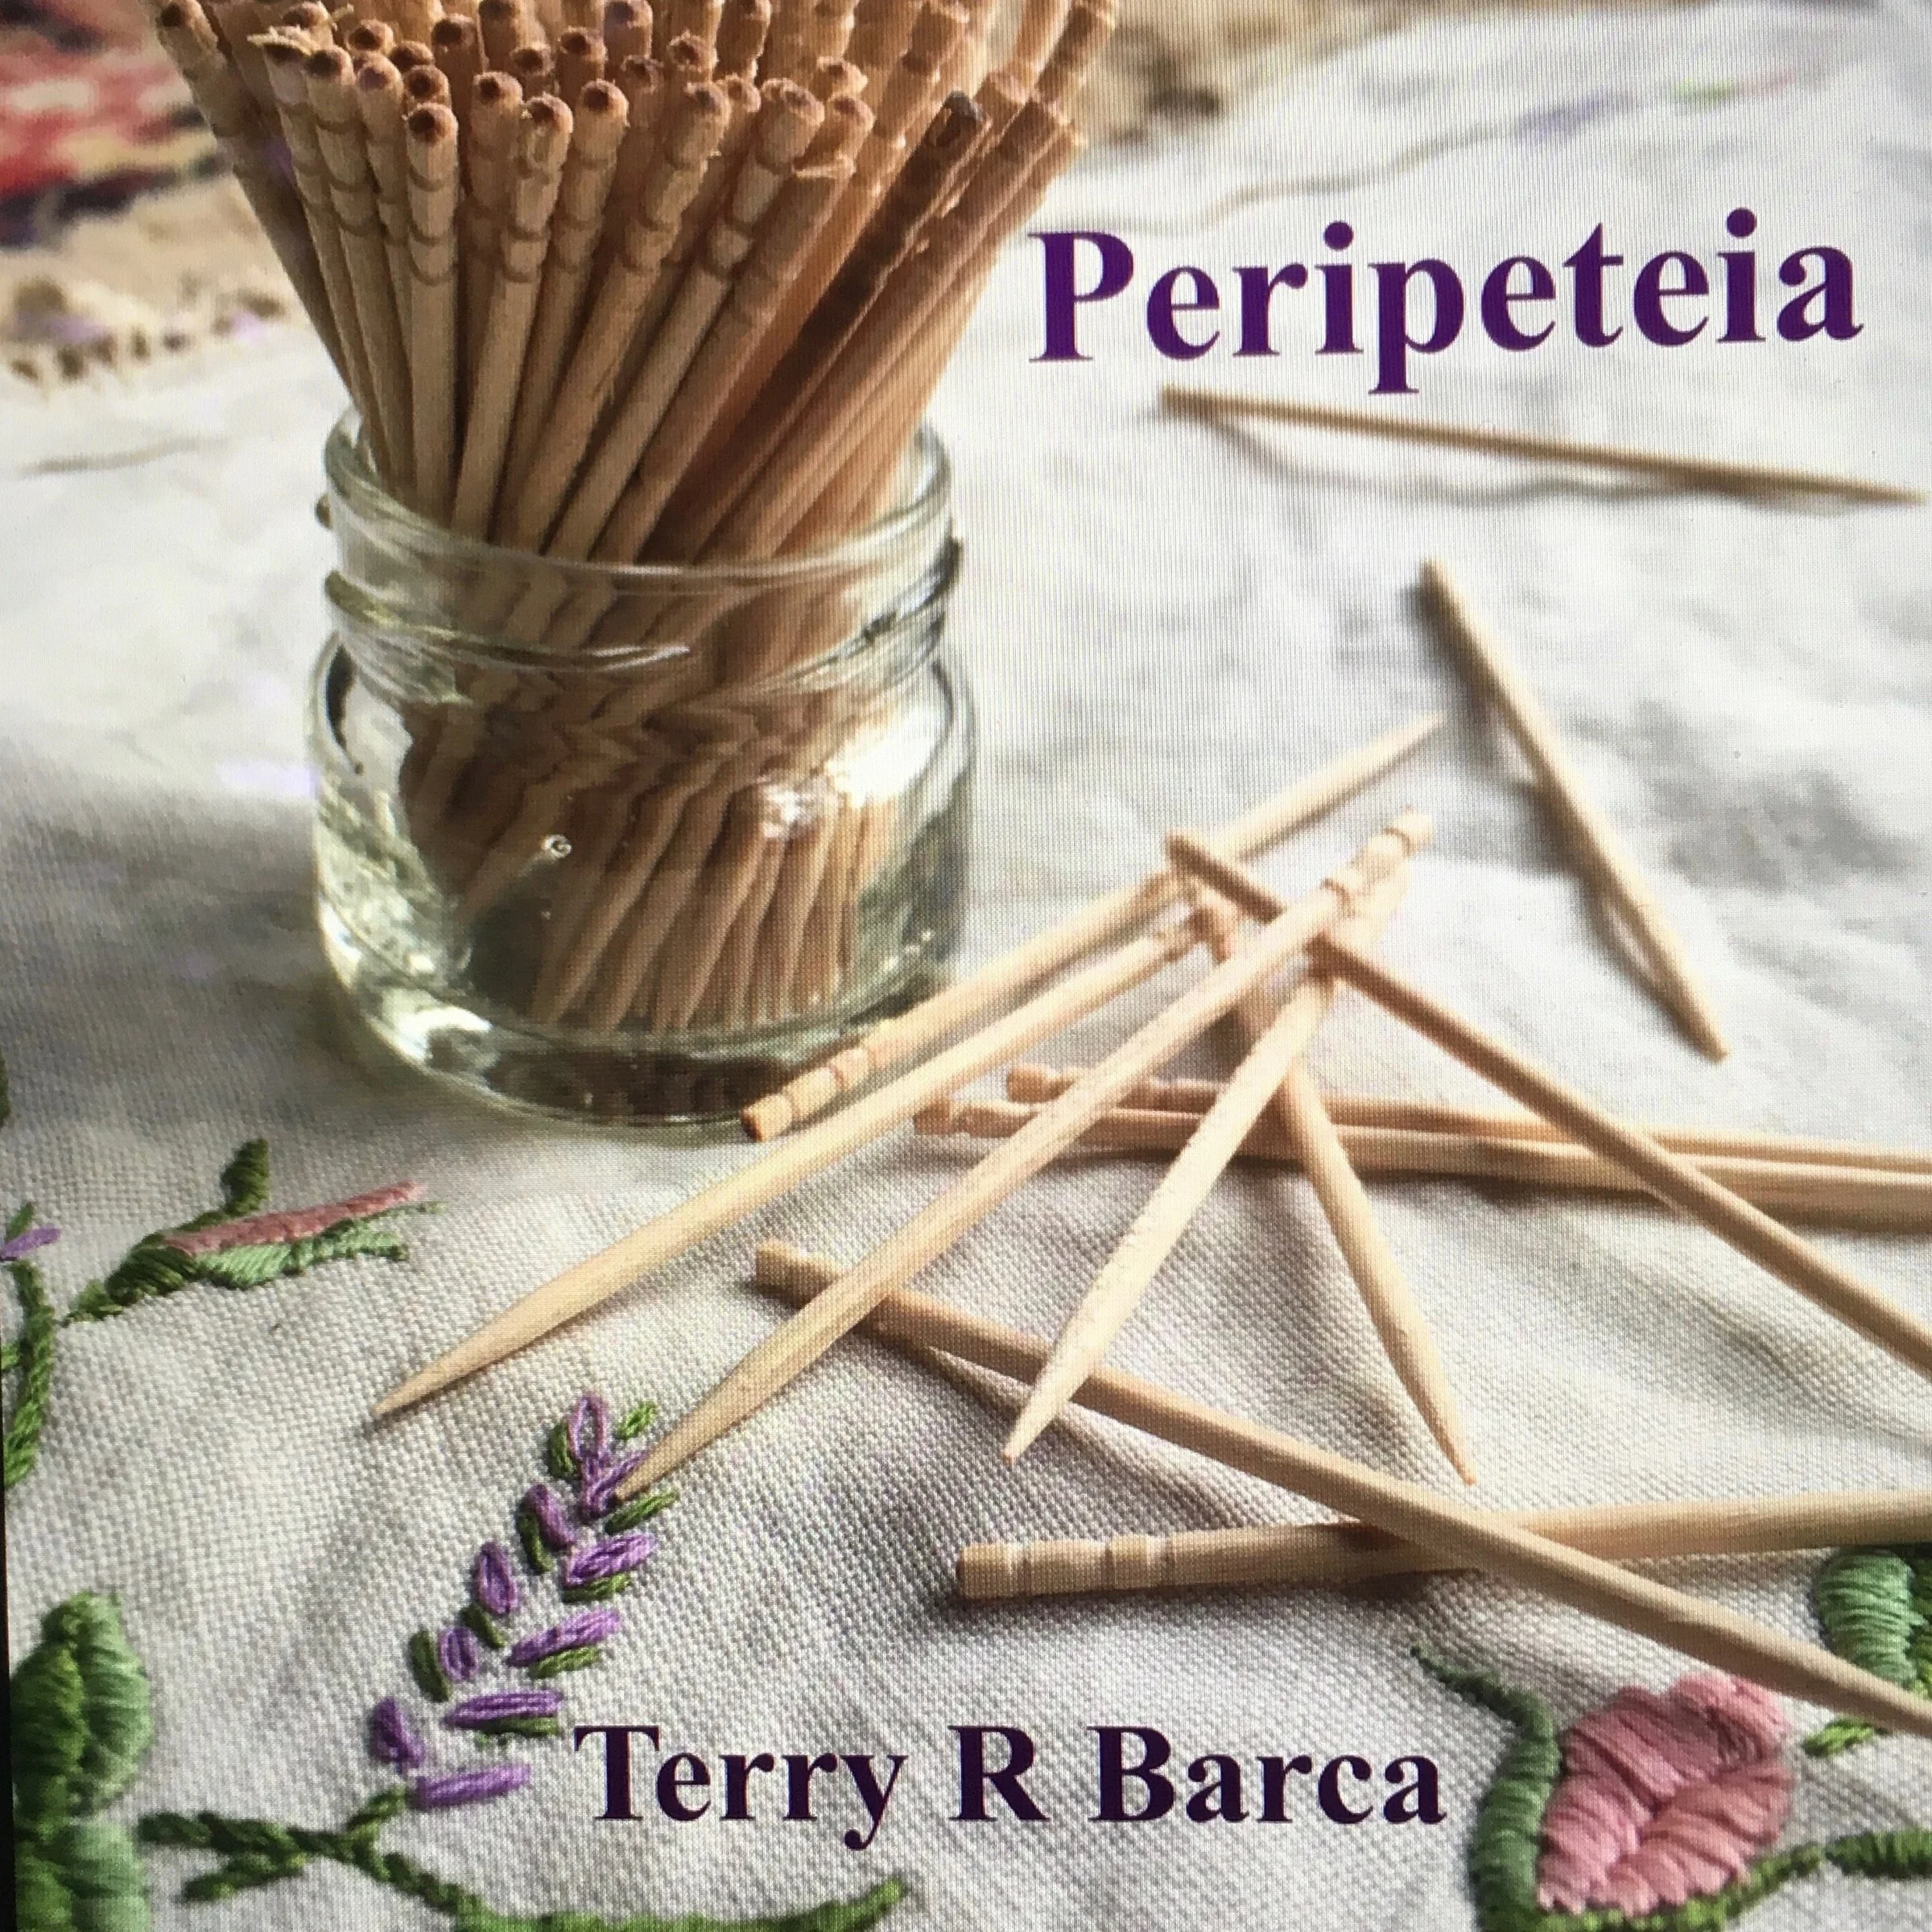 Peripeteia by Terry R Barca Audiobook